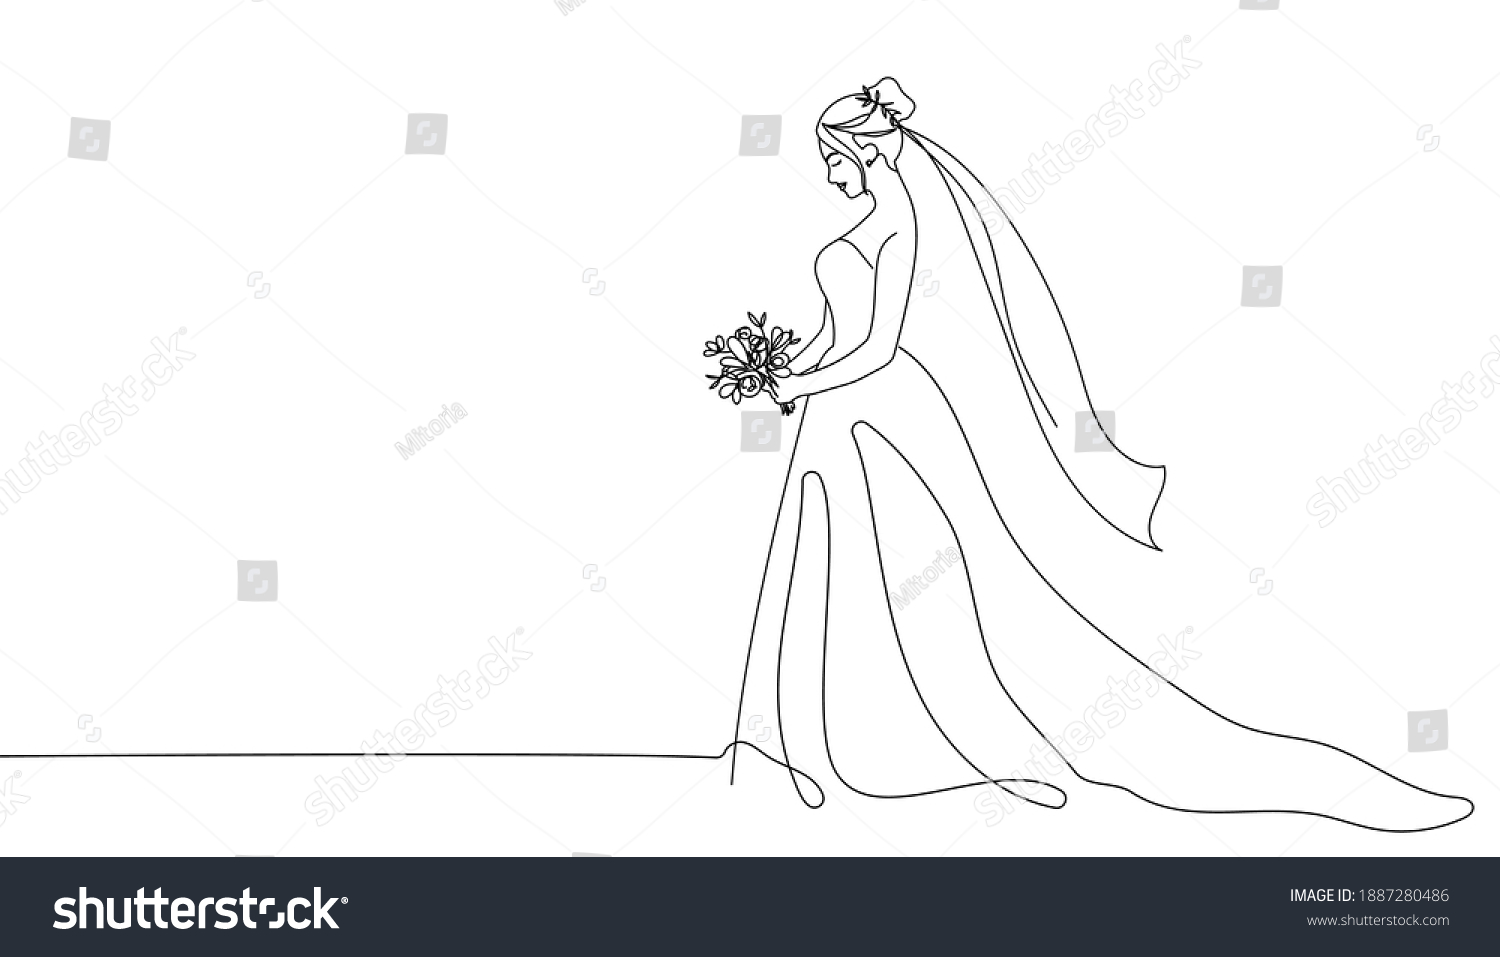 SVG of Bride holding a bouquet continuous line drawing.One line bride silhouette side view wearing a wedding dress.Continuous line hand drawn vector illustration for wedding,bridal shower invitation svg